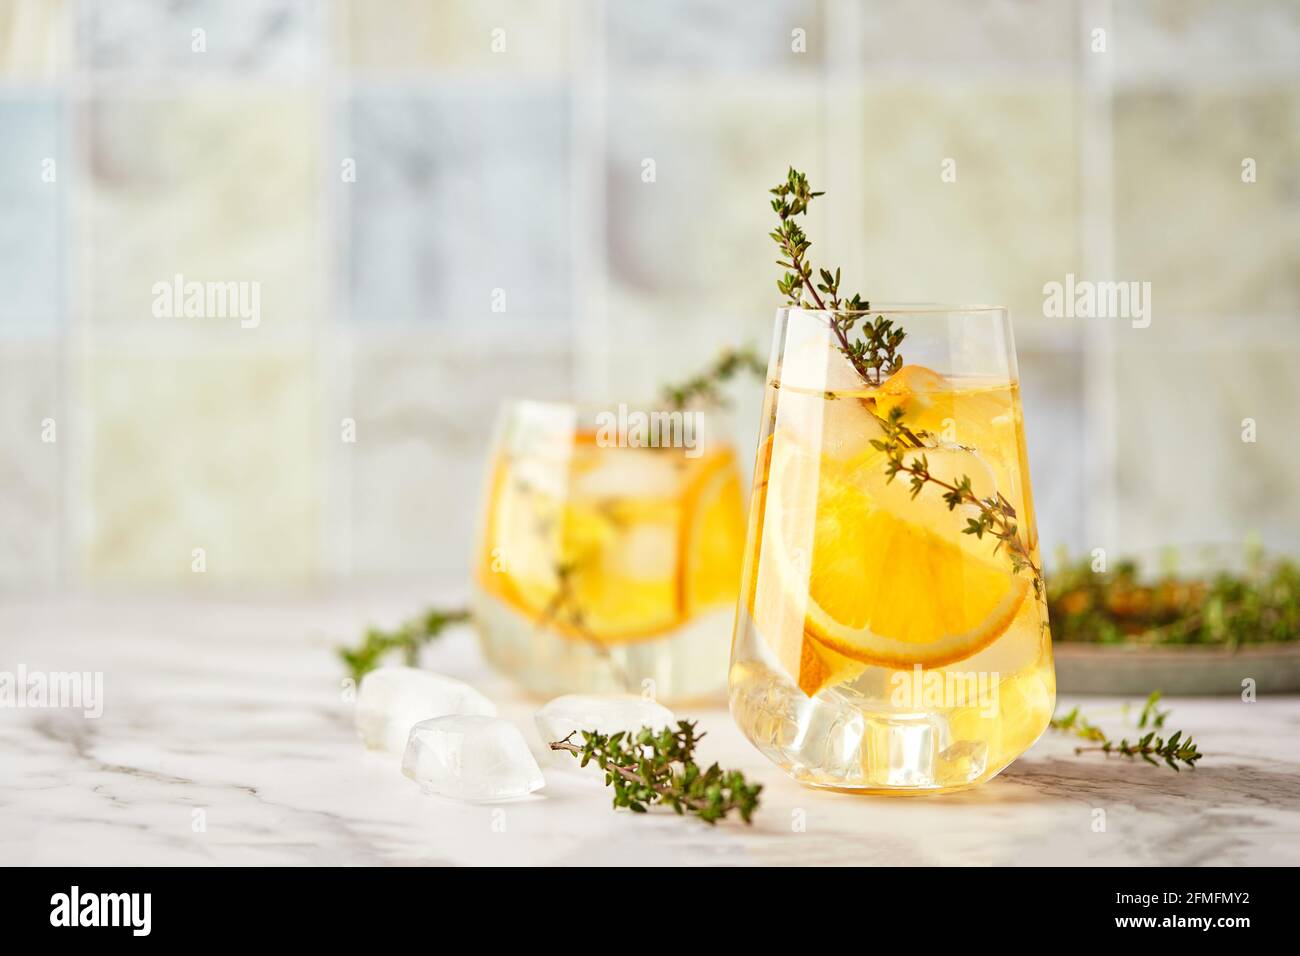 Refreshing cocktail with ice, orange and thyme. Refreshing summer homemade alcoholic or non-alcoholic cocktail or mocktail, or Detox infused flavored Stock Photo